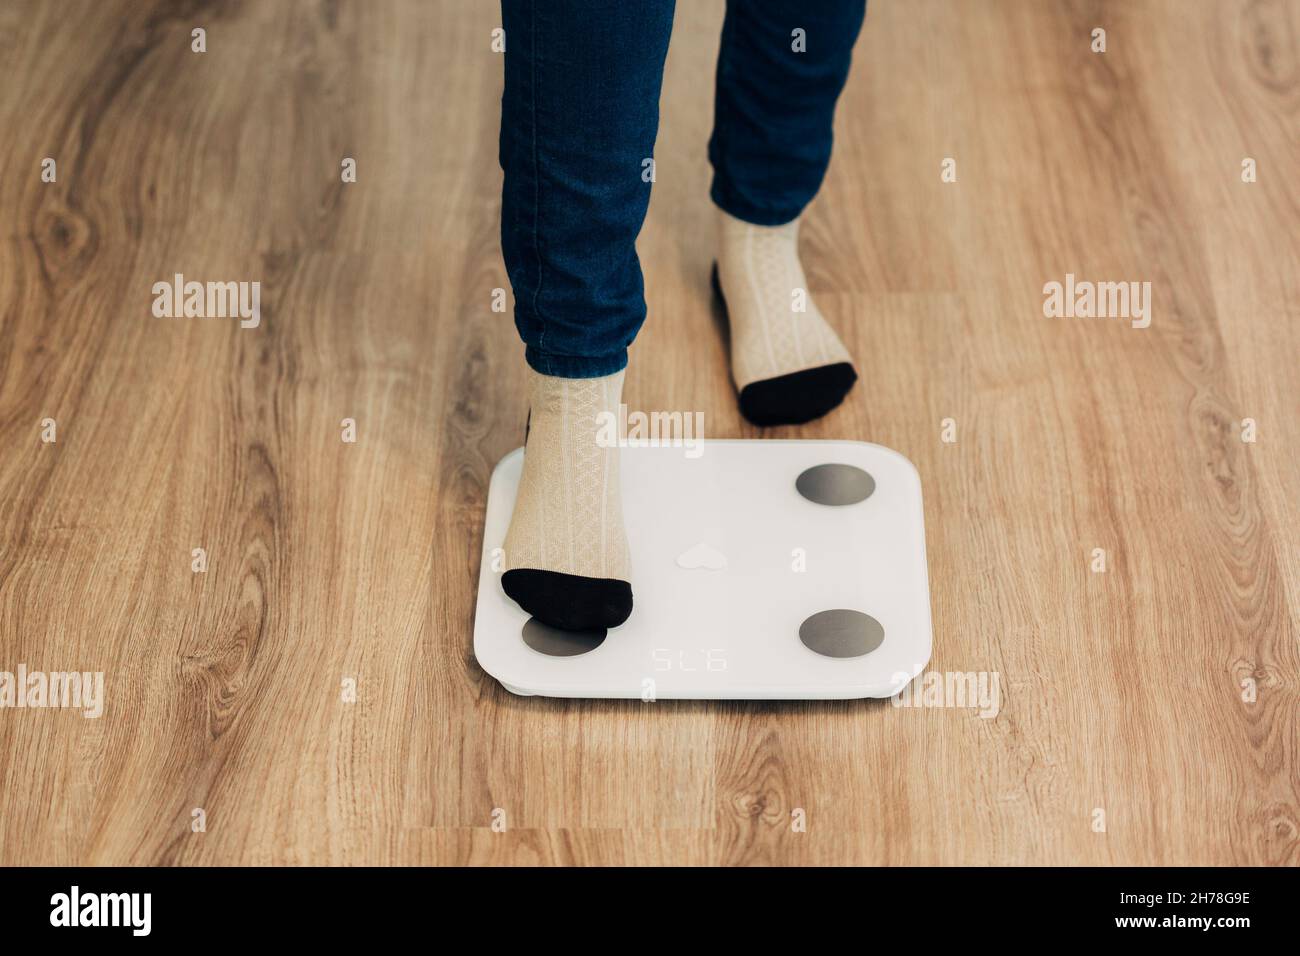 https://c8.alamy.com/comp/2H78G9E/girl-measures-weight-on-smart-scales-modern-electronic-device-2H78G9E.jpg